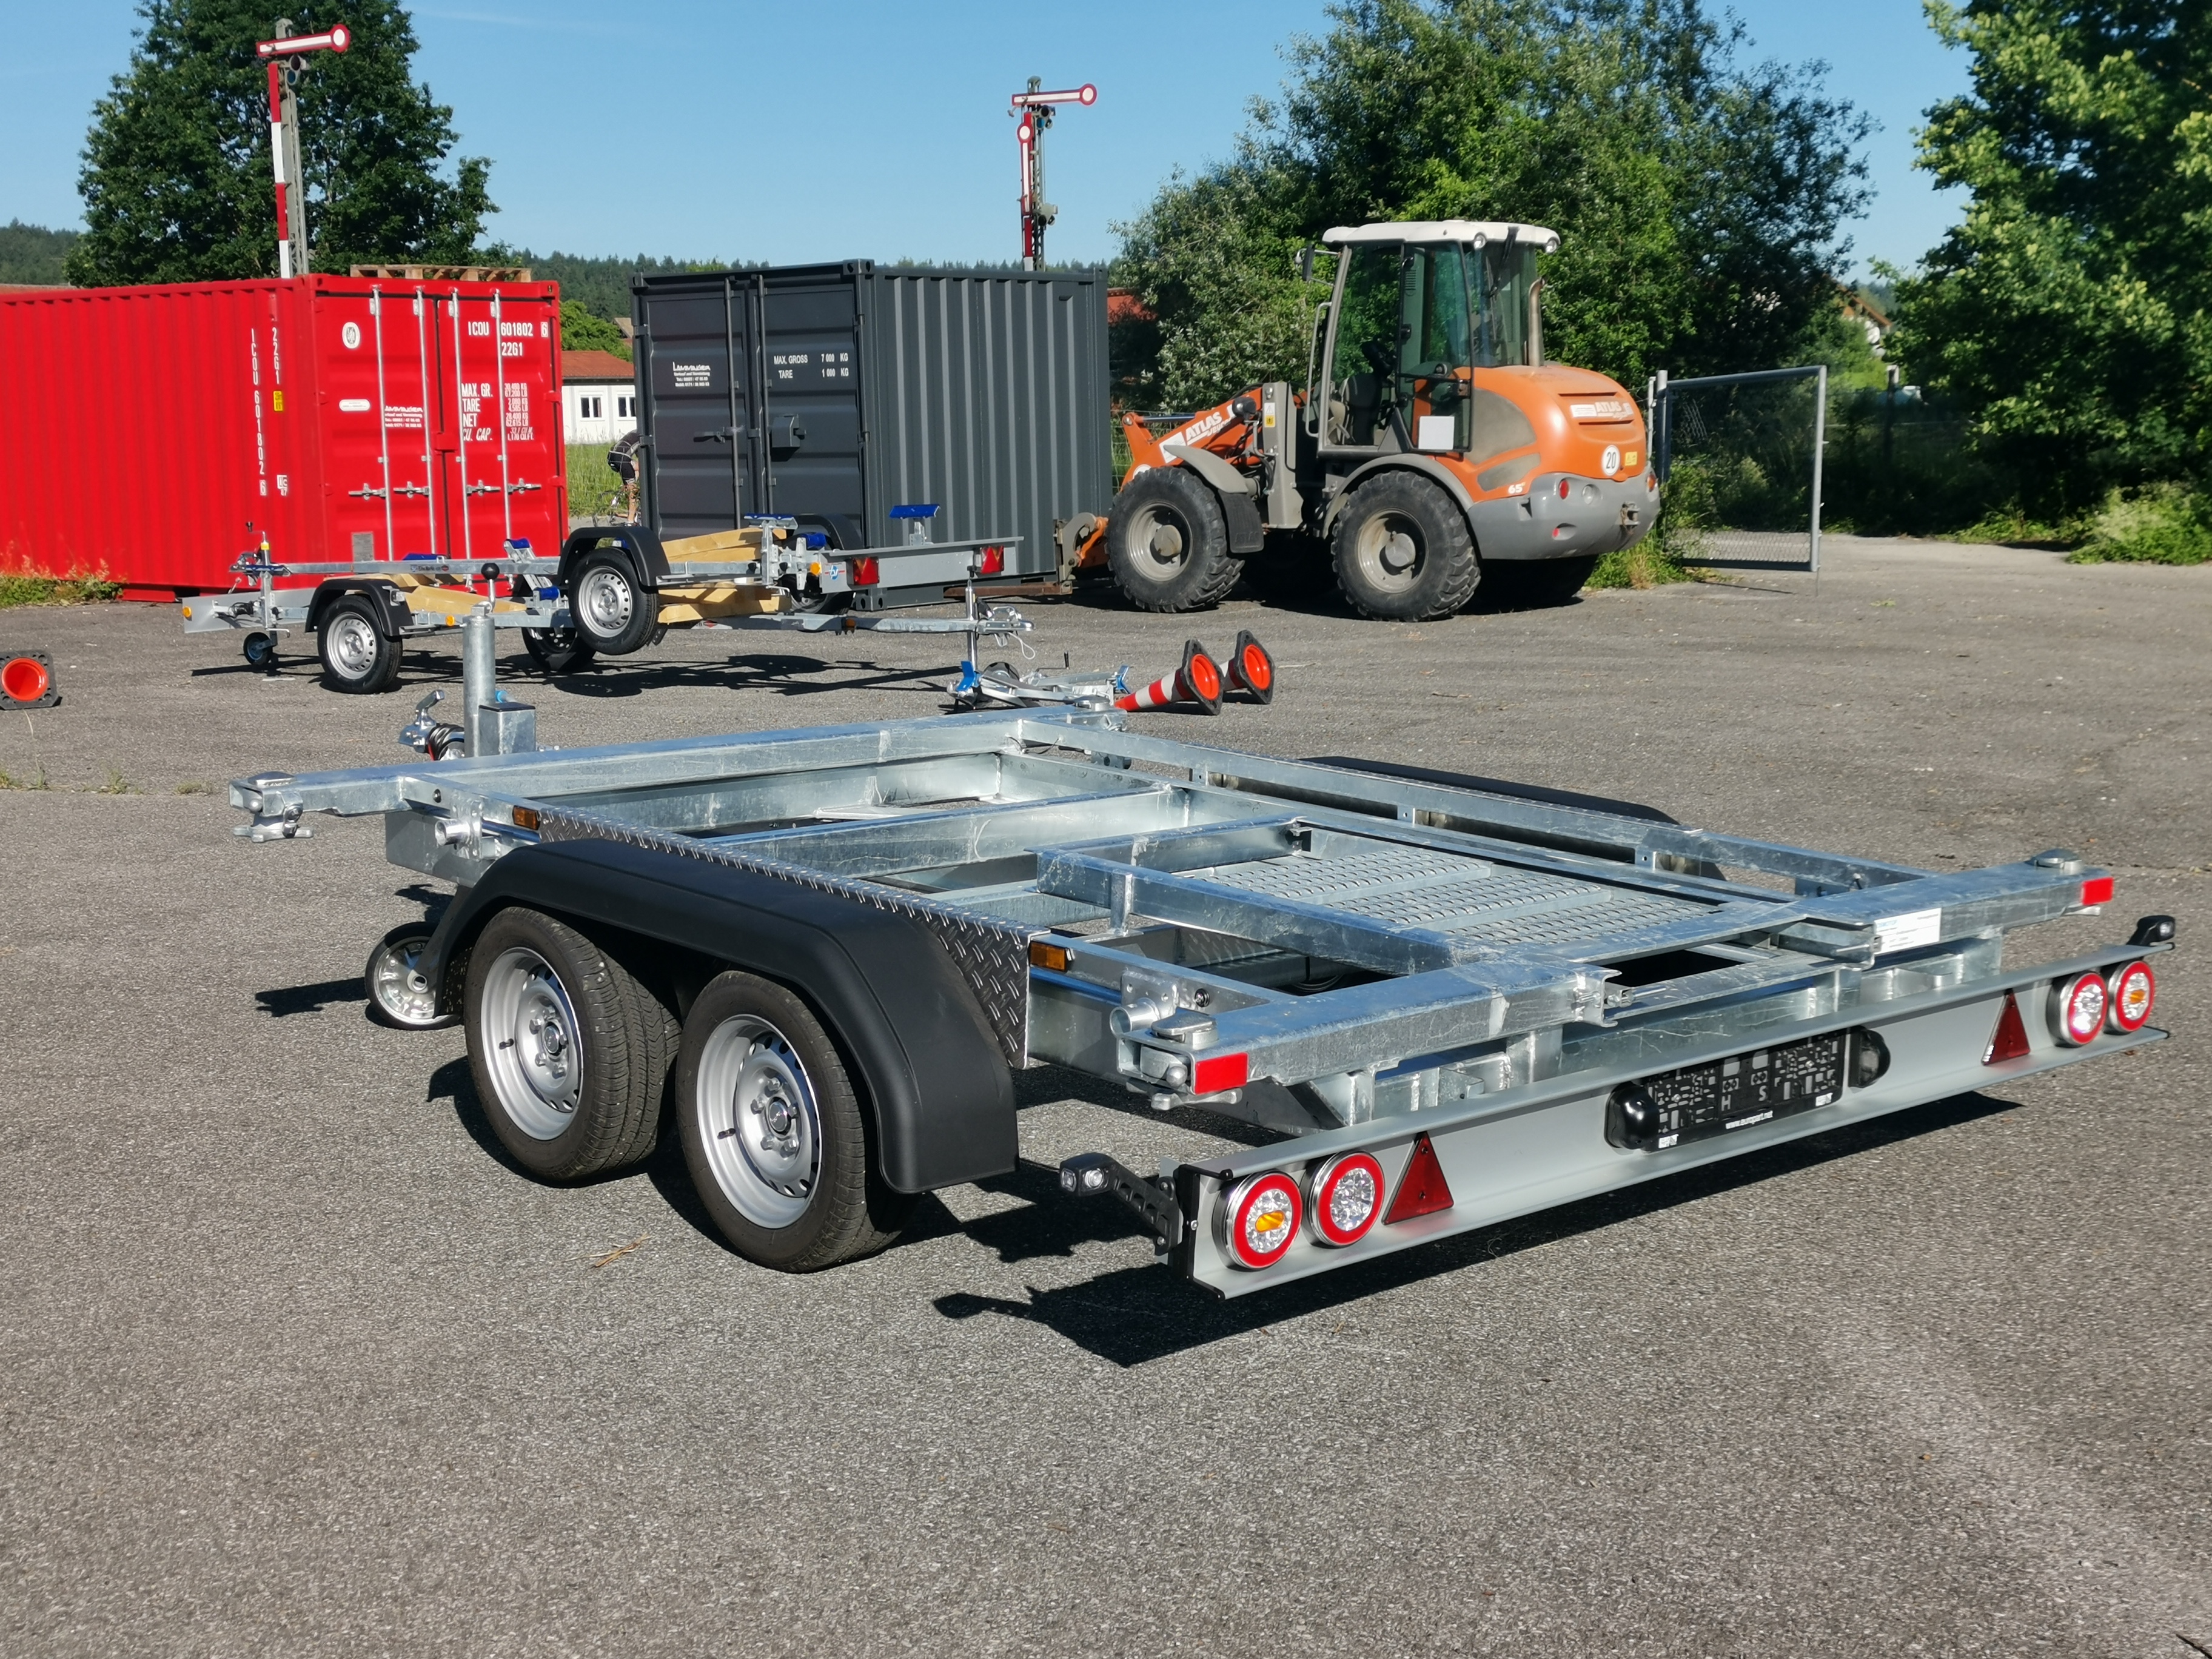 Containerchassis